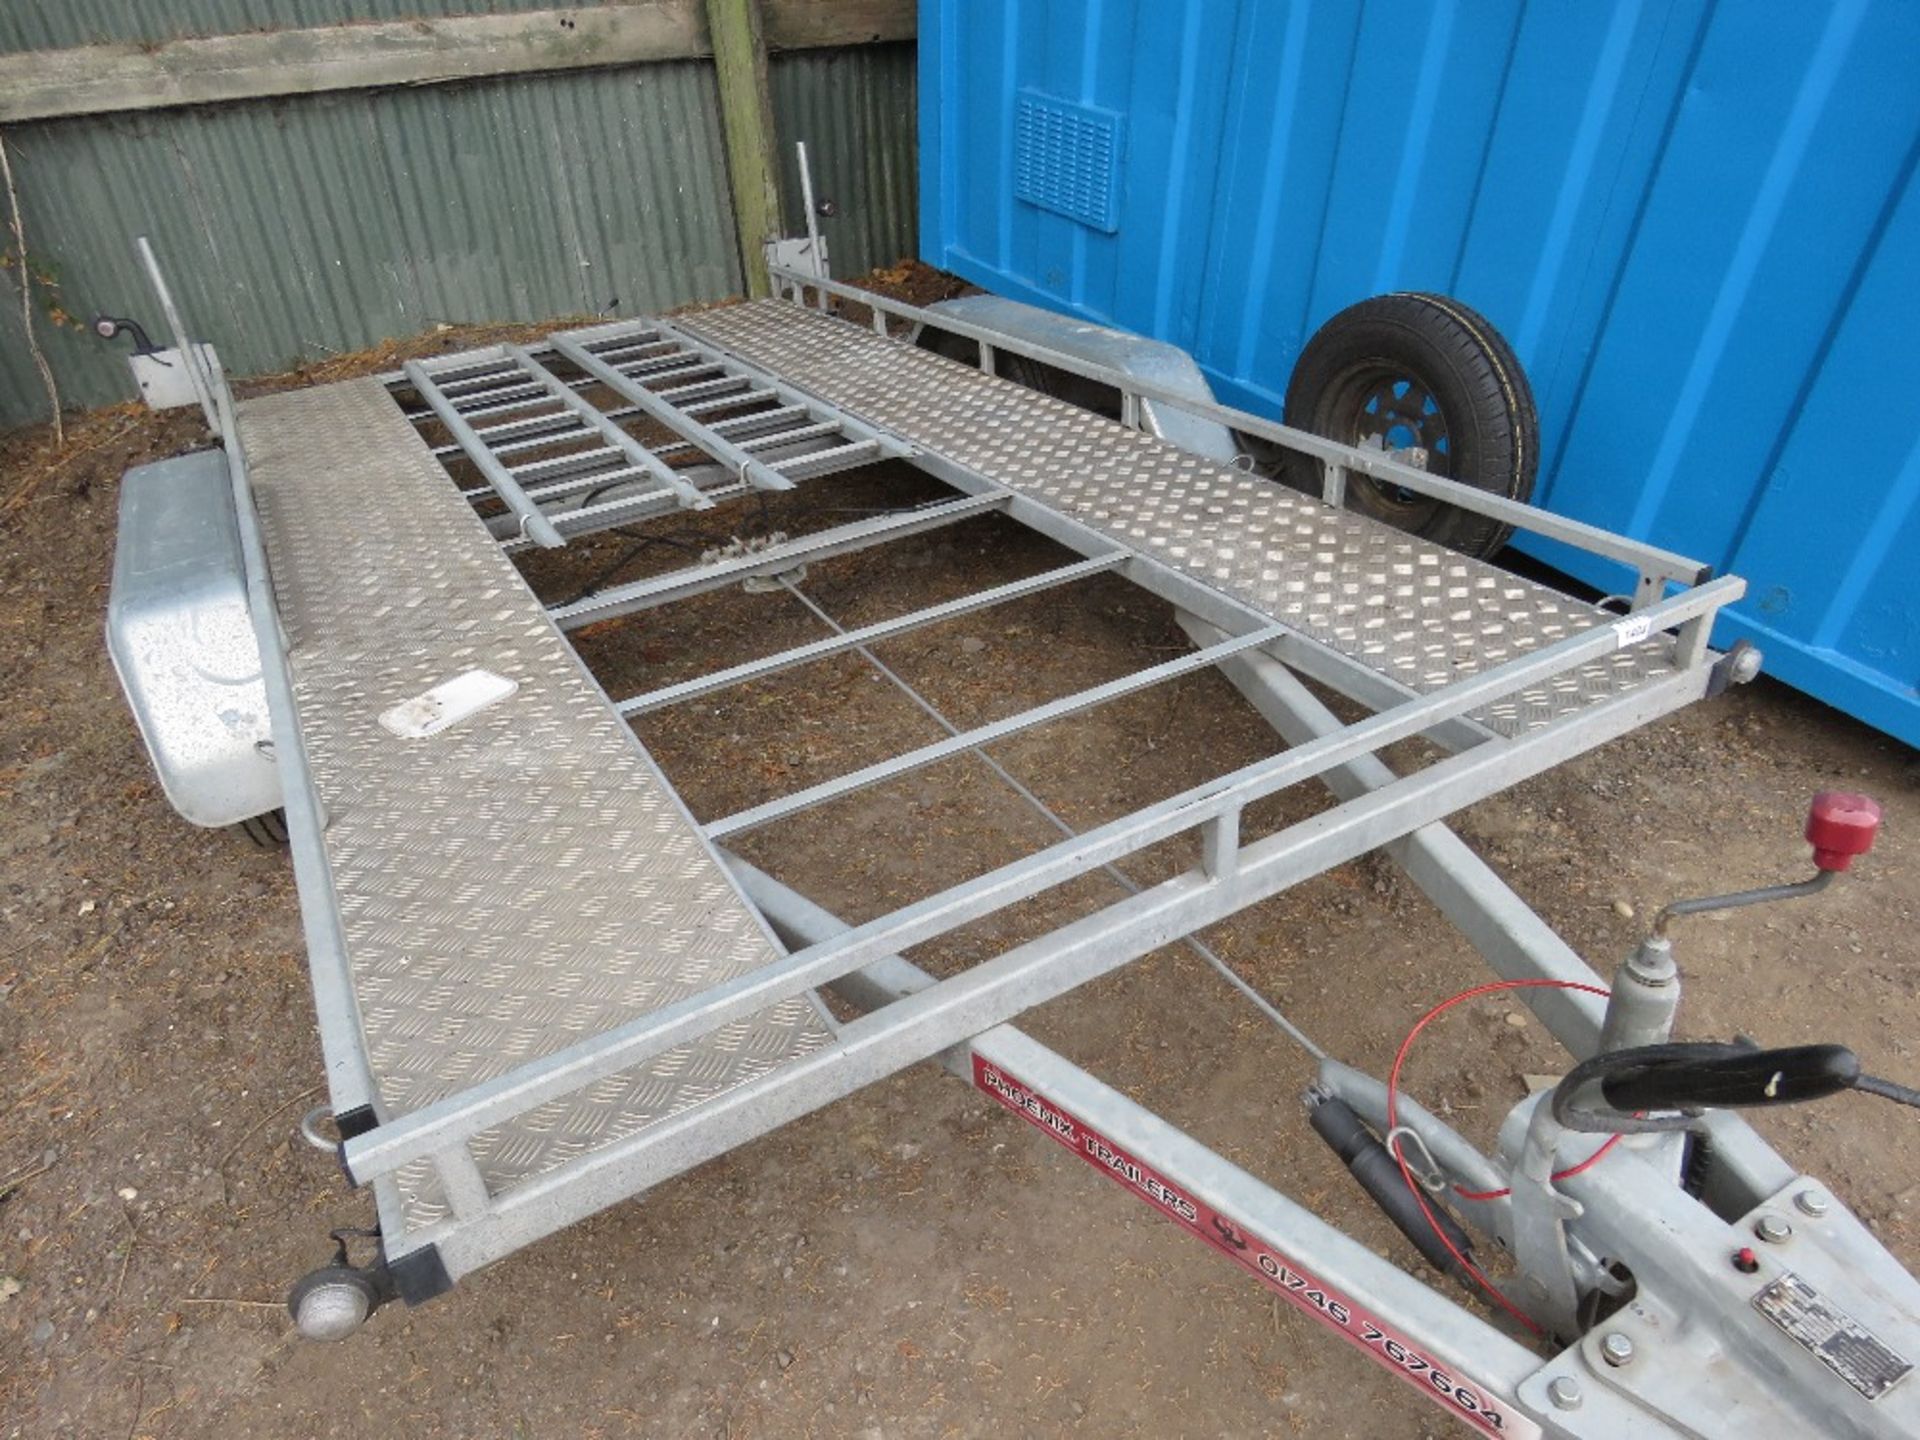 PHOENIX 1700KG TWIN AXLED CAR TRAILER 12FT X 6FT BED APPROX, YEAR 2016. SN:SHACARTRANS00063. SOURC - Image 4 of 7